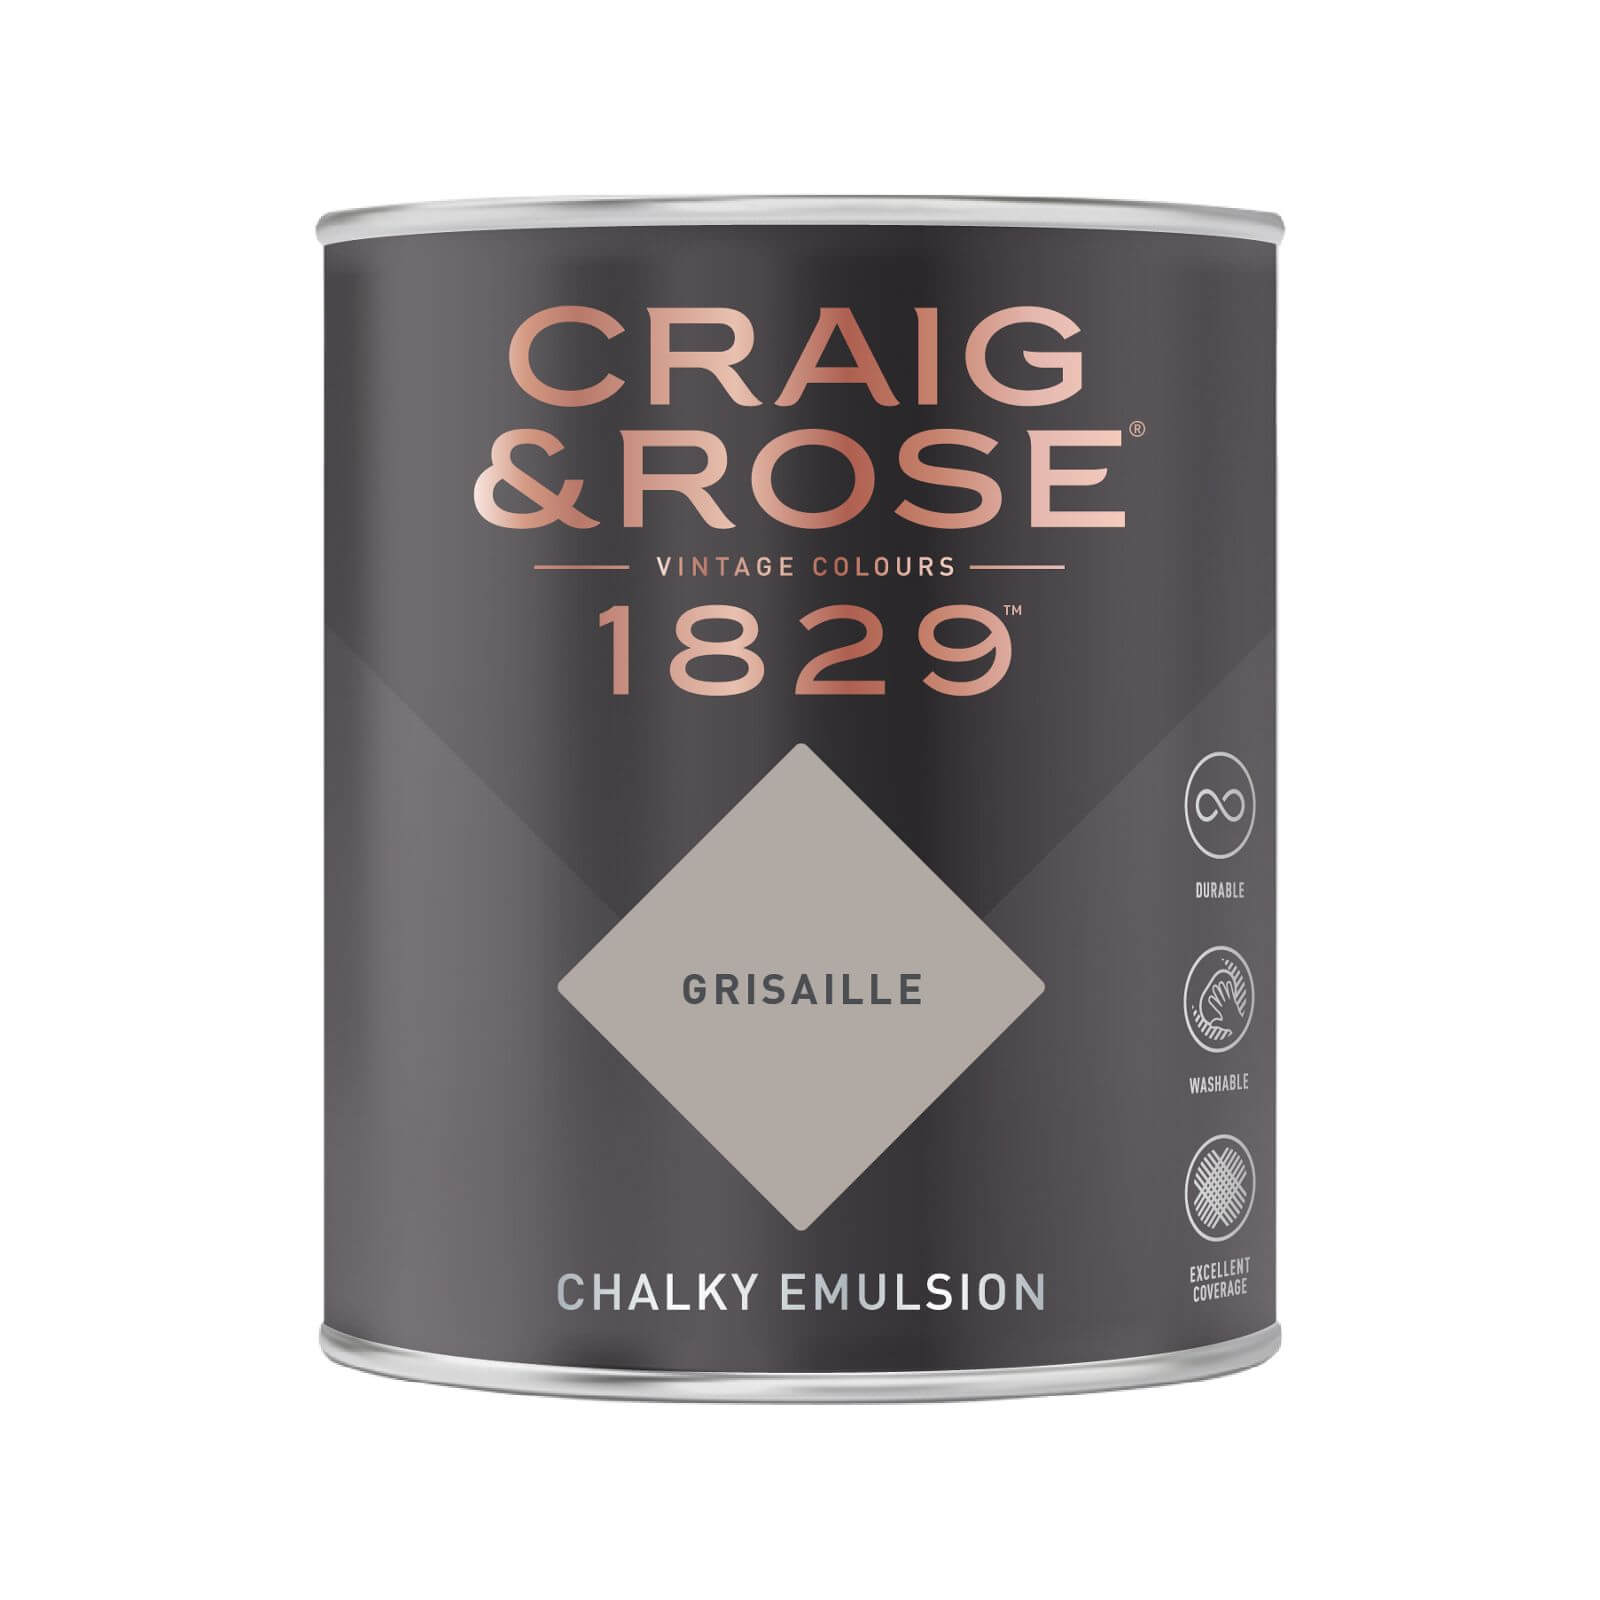 Craig & Rose 1829 Chalky Emulsion Paint Grisaille - 750ml